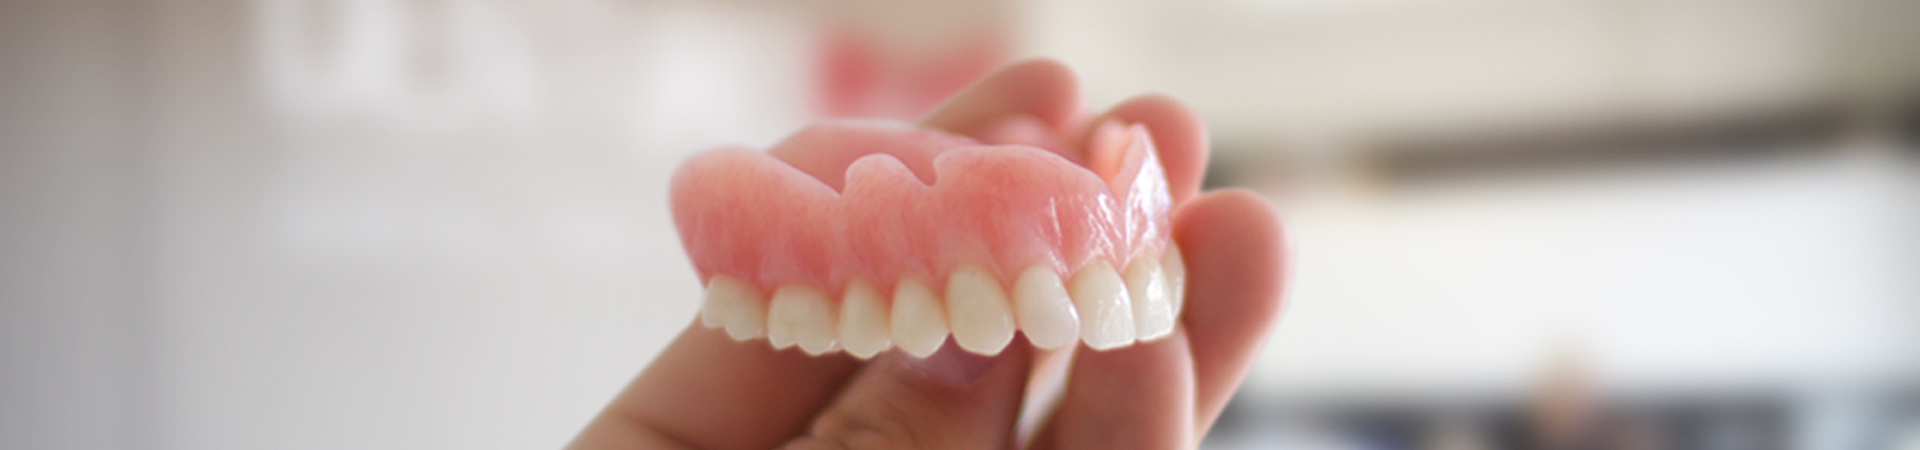 Affordable, stable solutions at Dentures Plus in Leederville, Maddington, Leeming and Joondalup